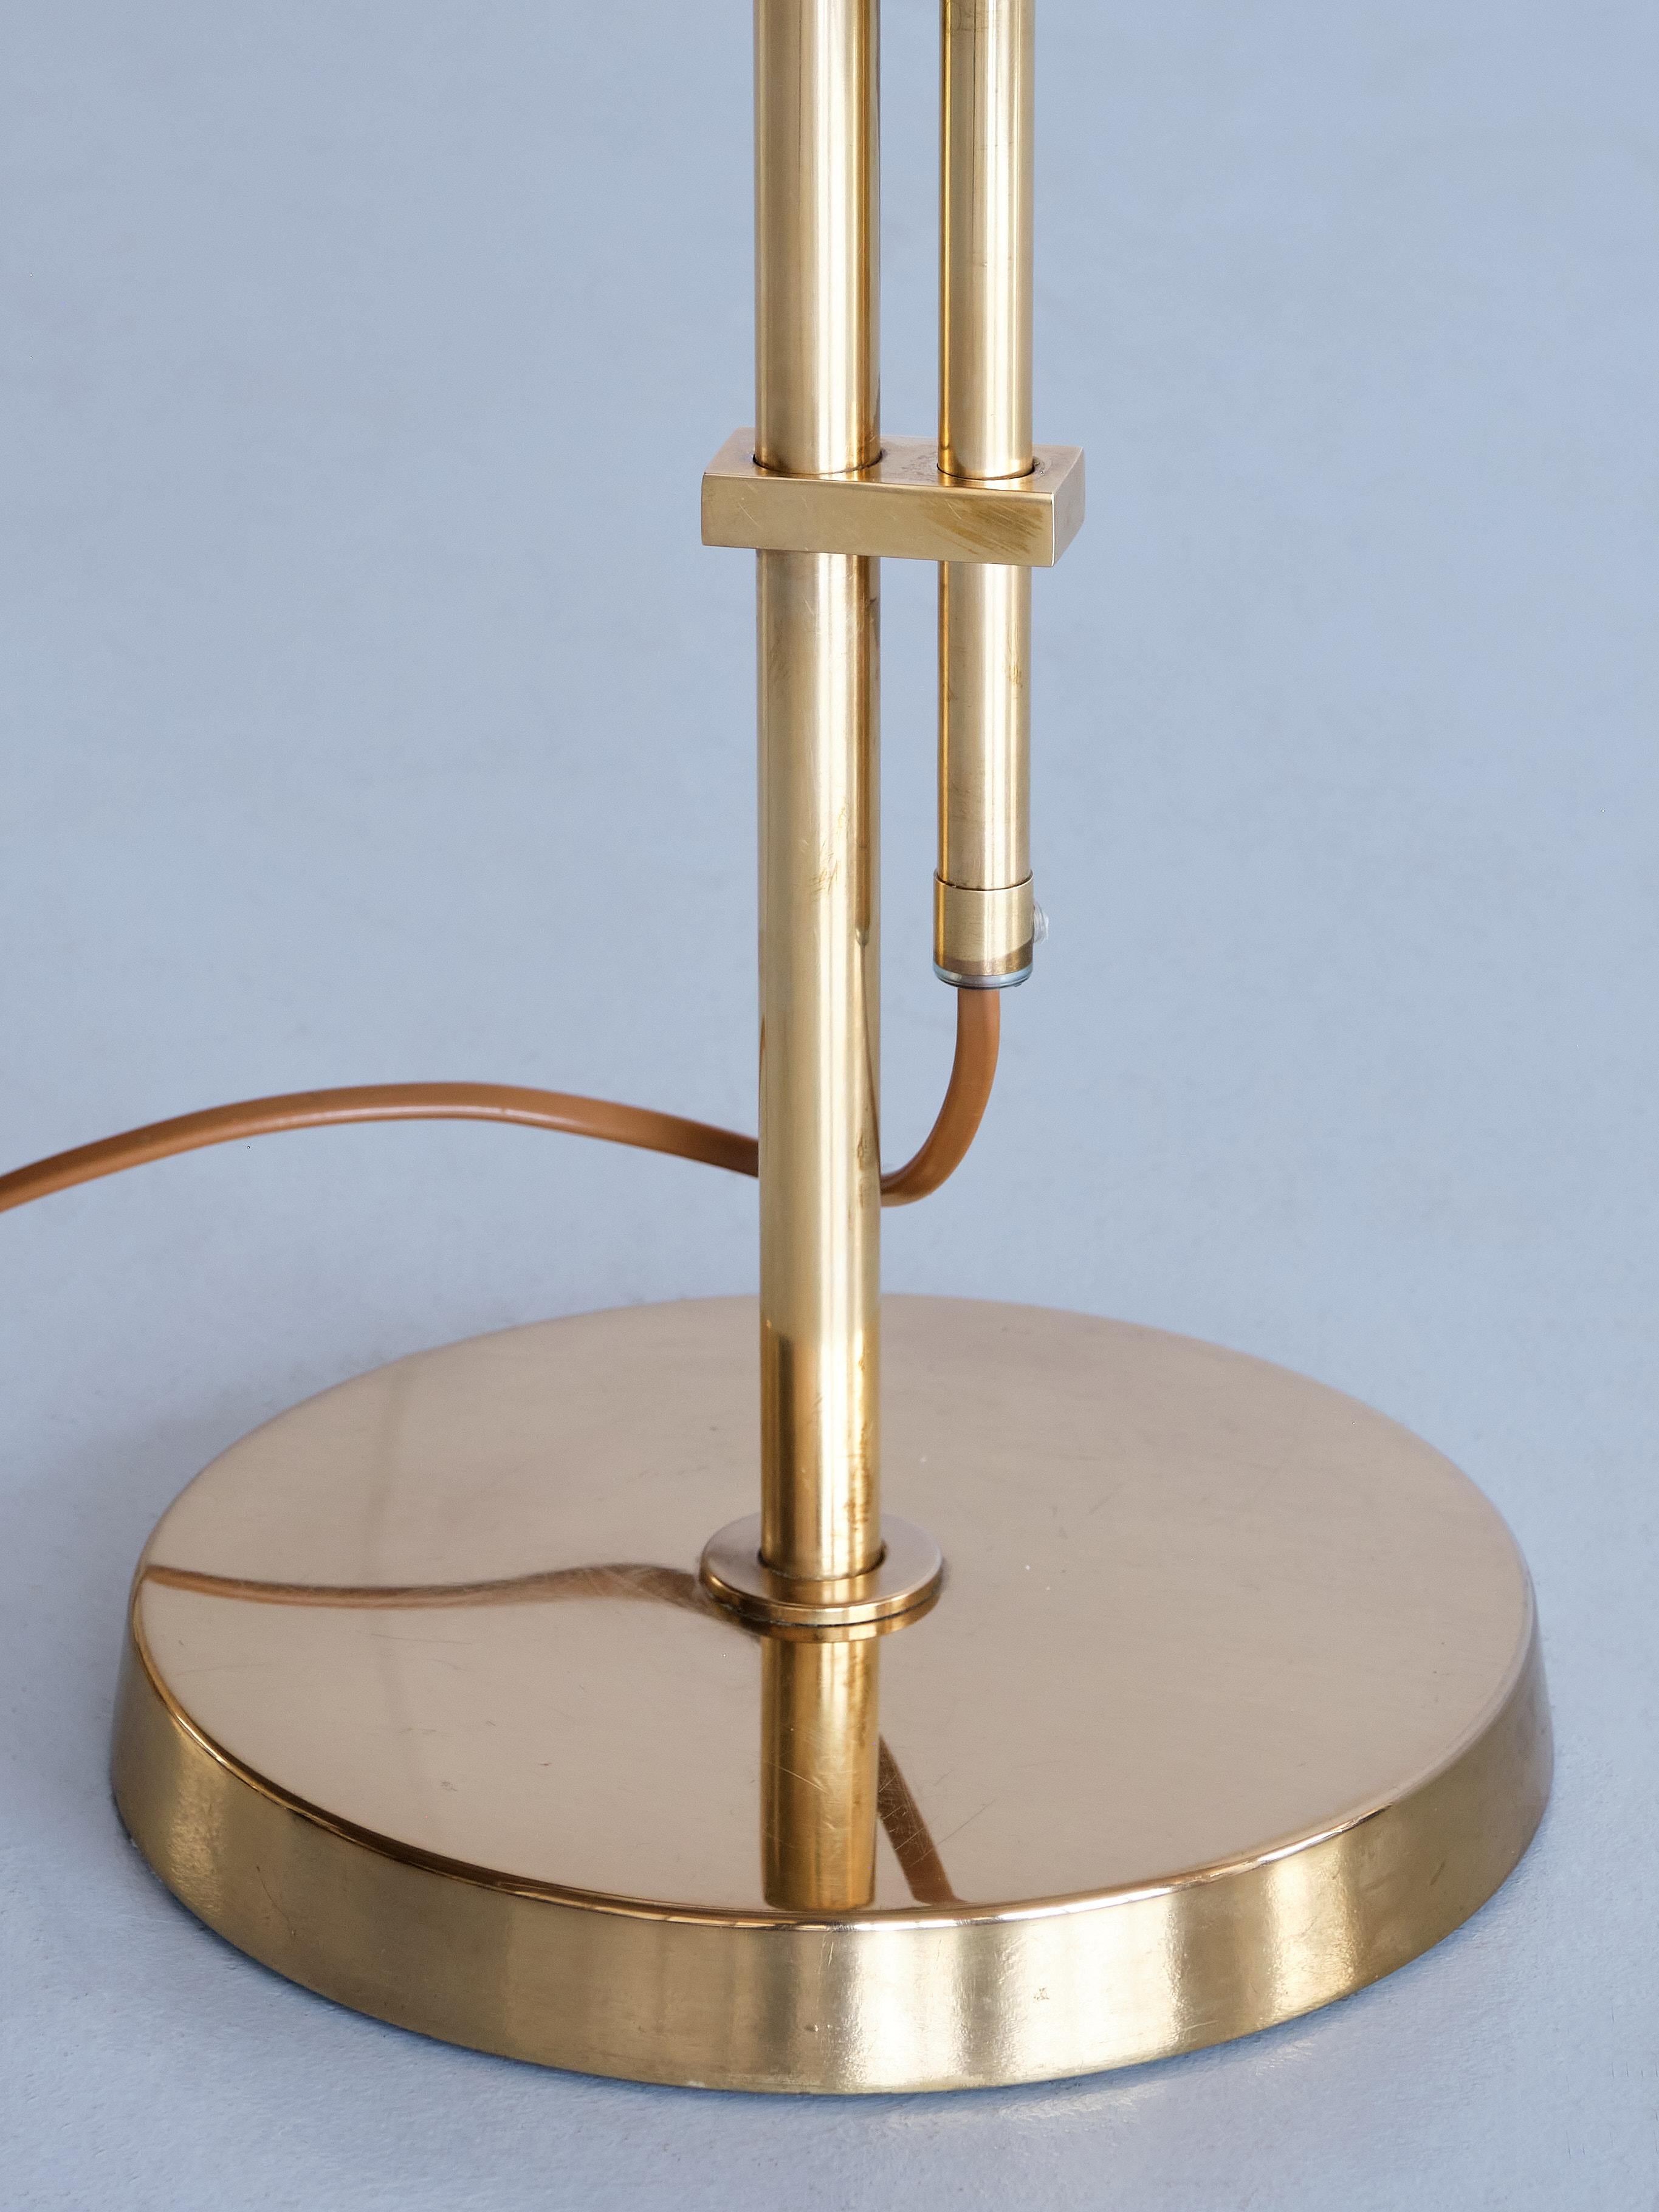 Bergboms B-131 Height Adjustable Table Lamp in Brass, Sweden, 1950s For Sale 2